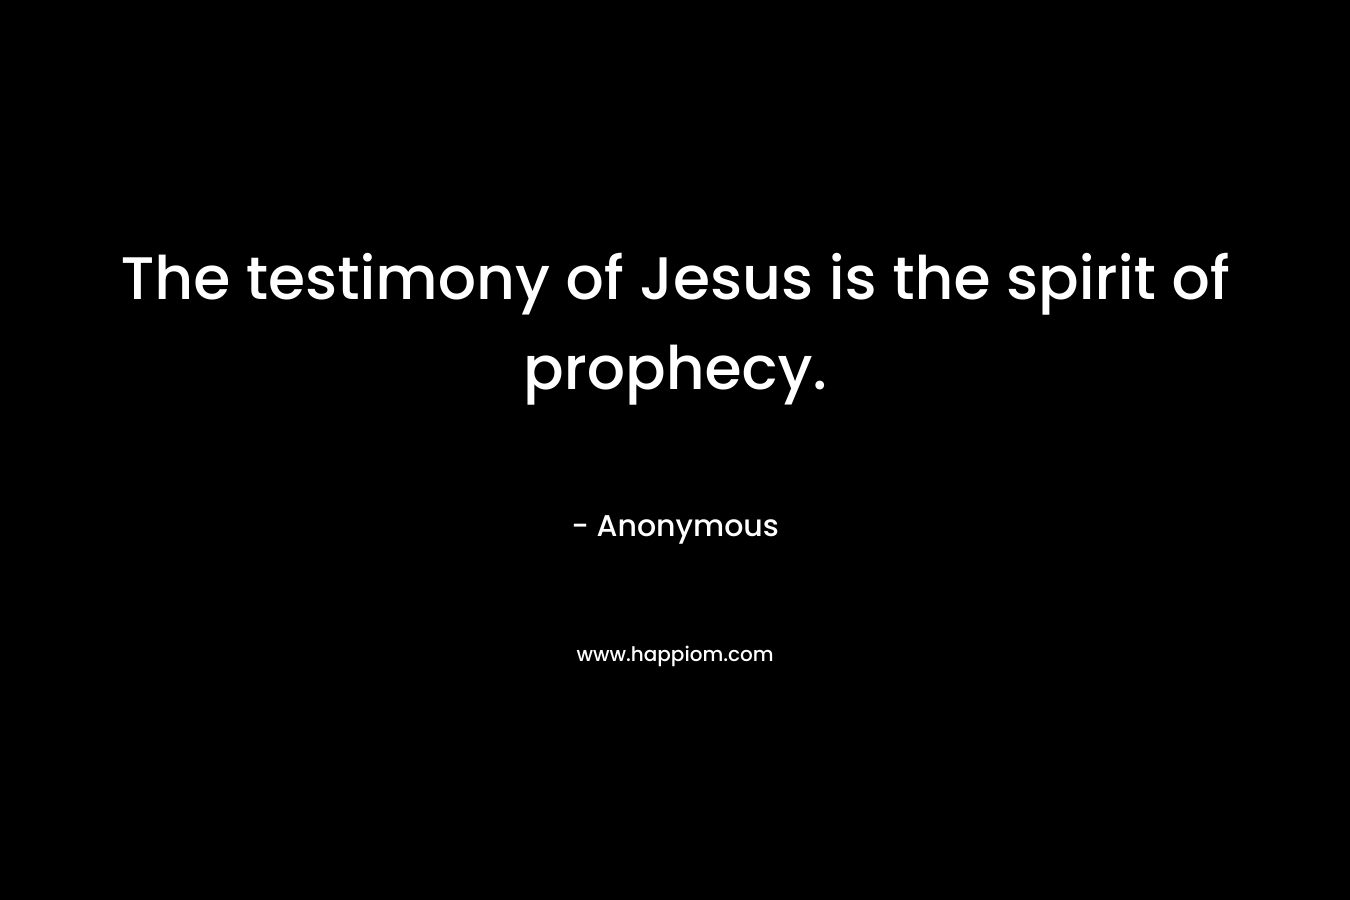 The testimony of Jesus is the spirit of prophecy.